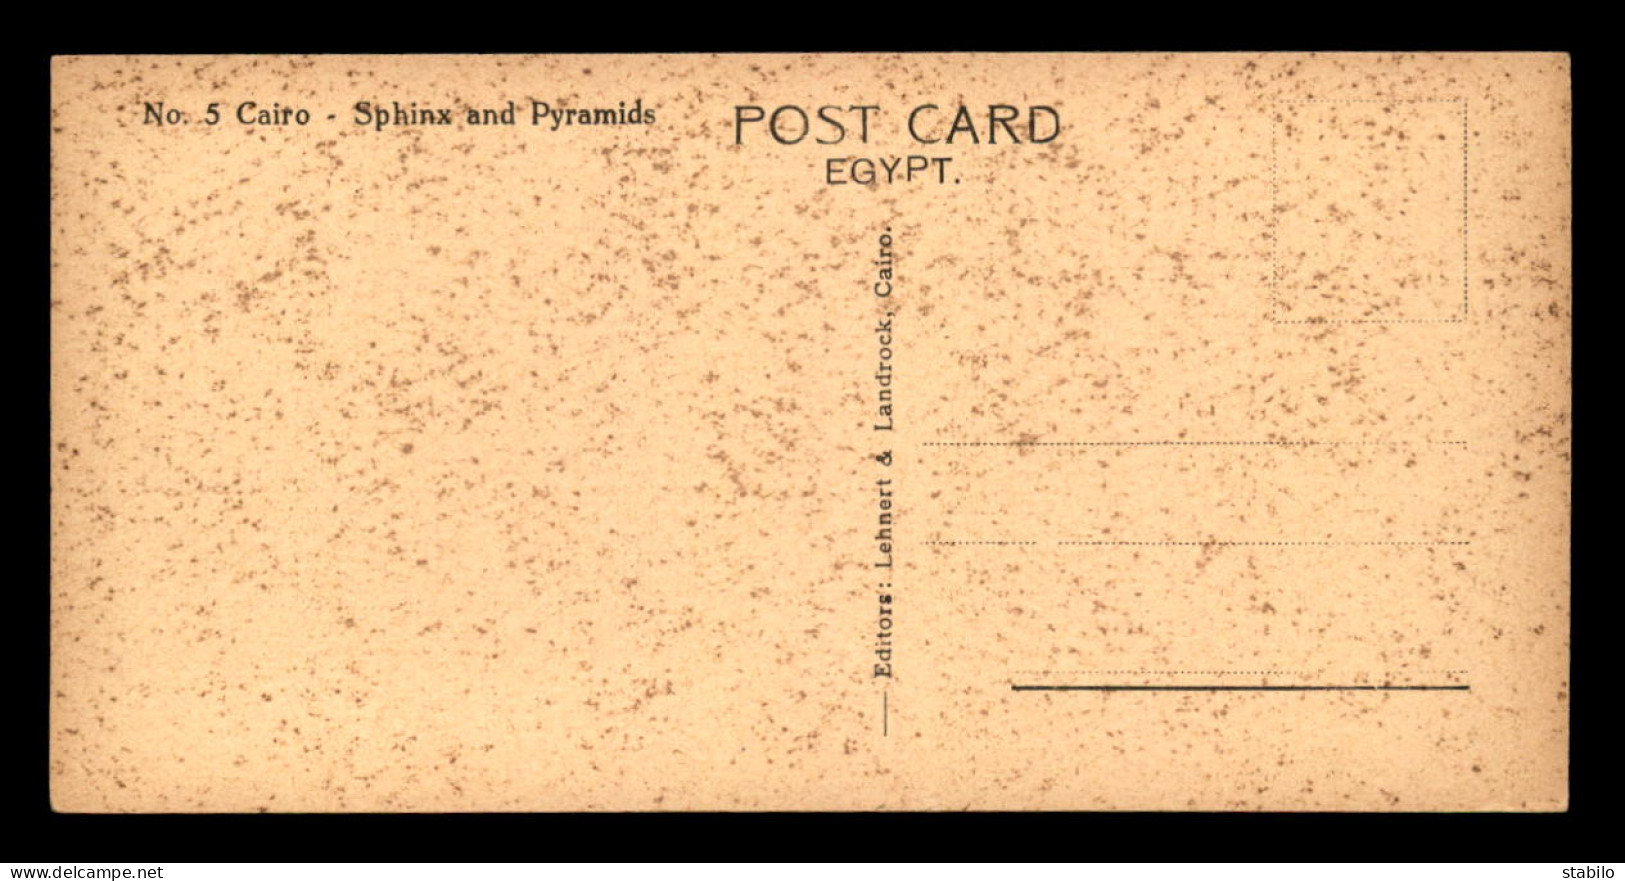 EGYPTE - LENHERT & LANDROCK N° 5 - CAIRO - SPHINX AND PYRAMIDS - FORMAT 15 X 7.5 CM - Le Caire